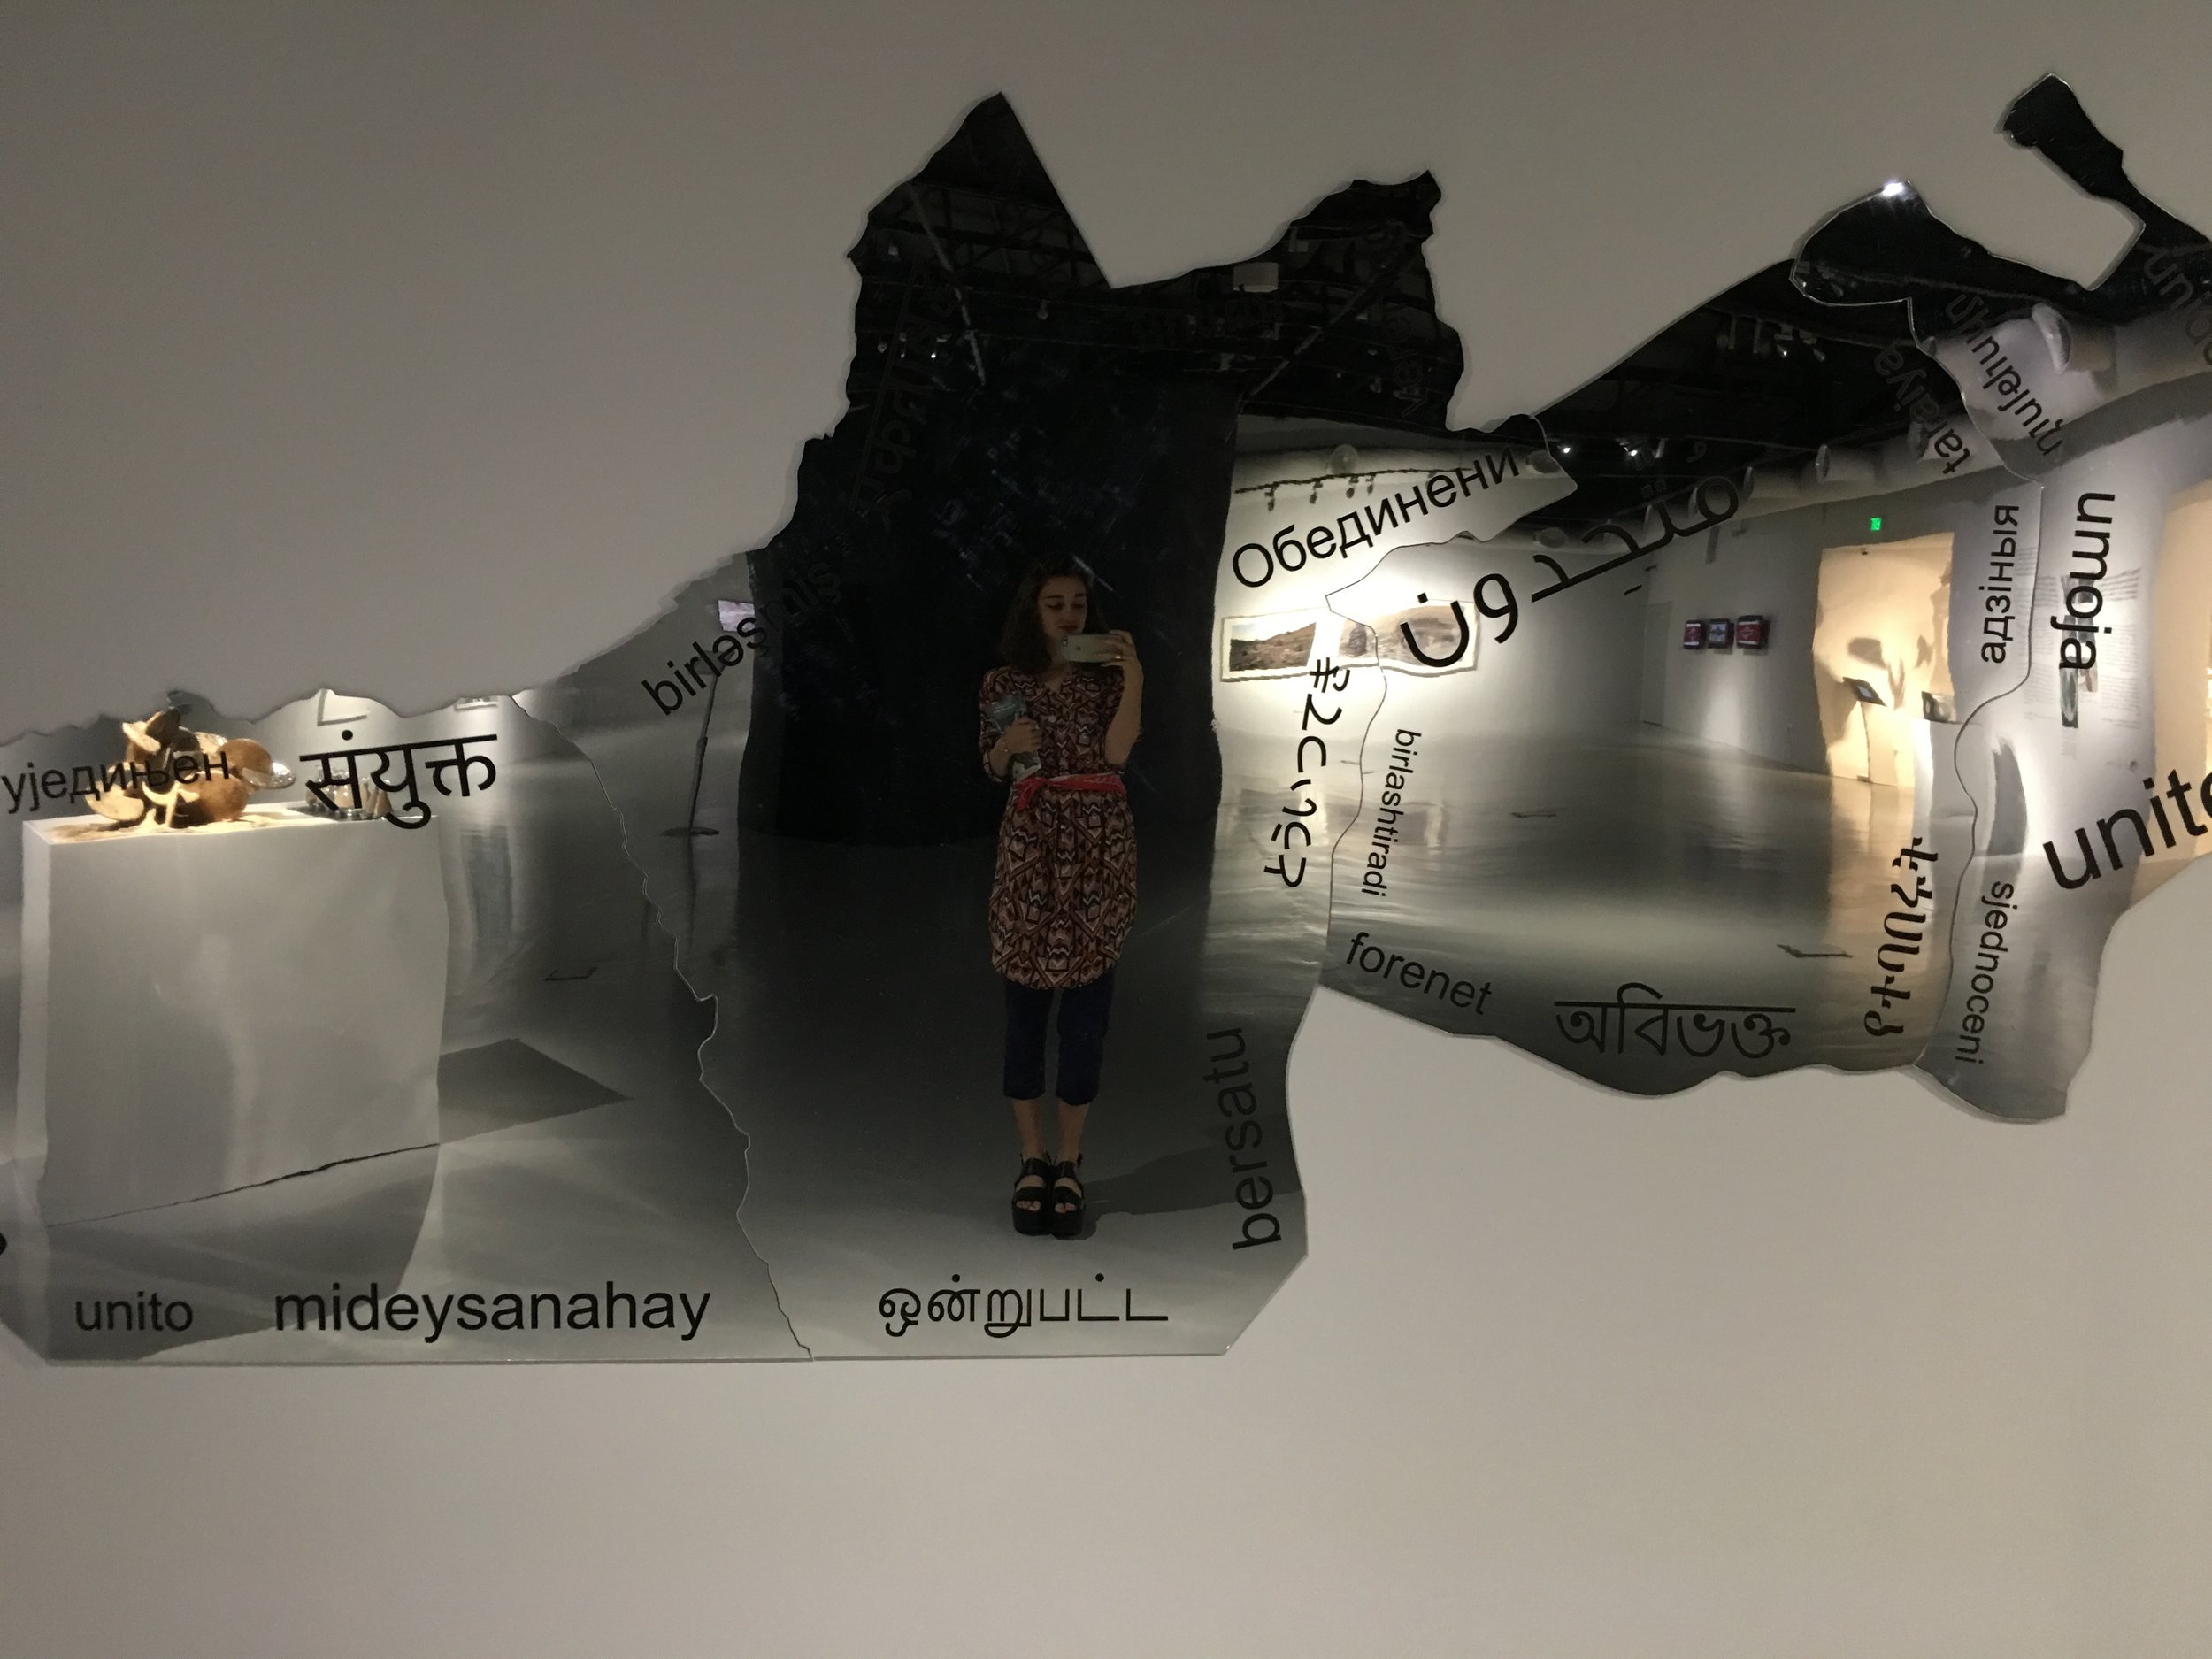 Amna Al Dabbagh, United, 2016, acrylic mirror and printed lettering. Courtesy of the artist. Part of ADMAF collection